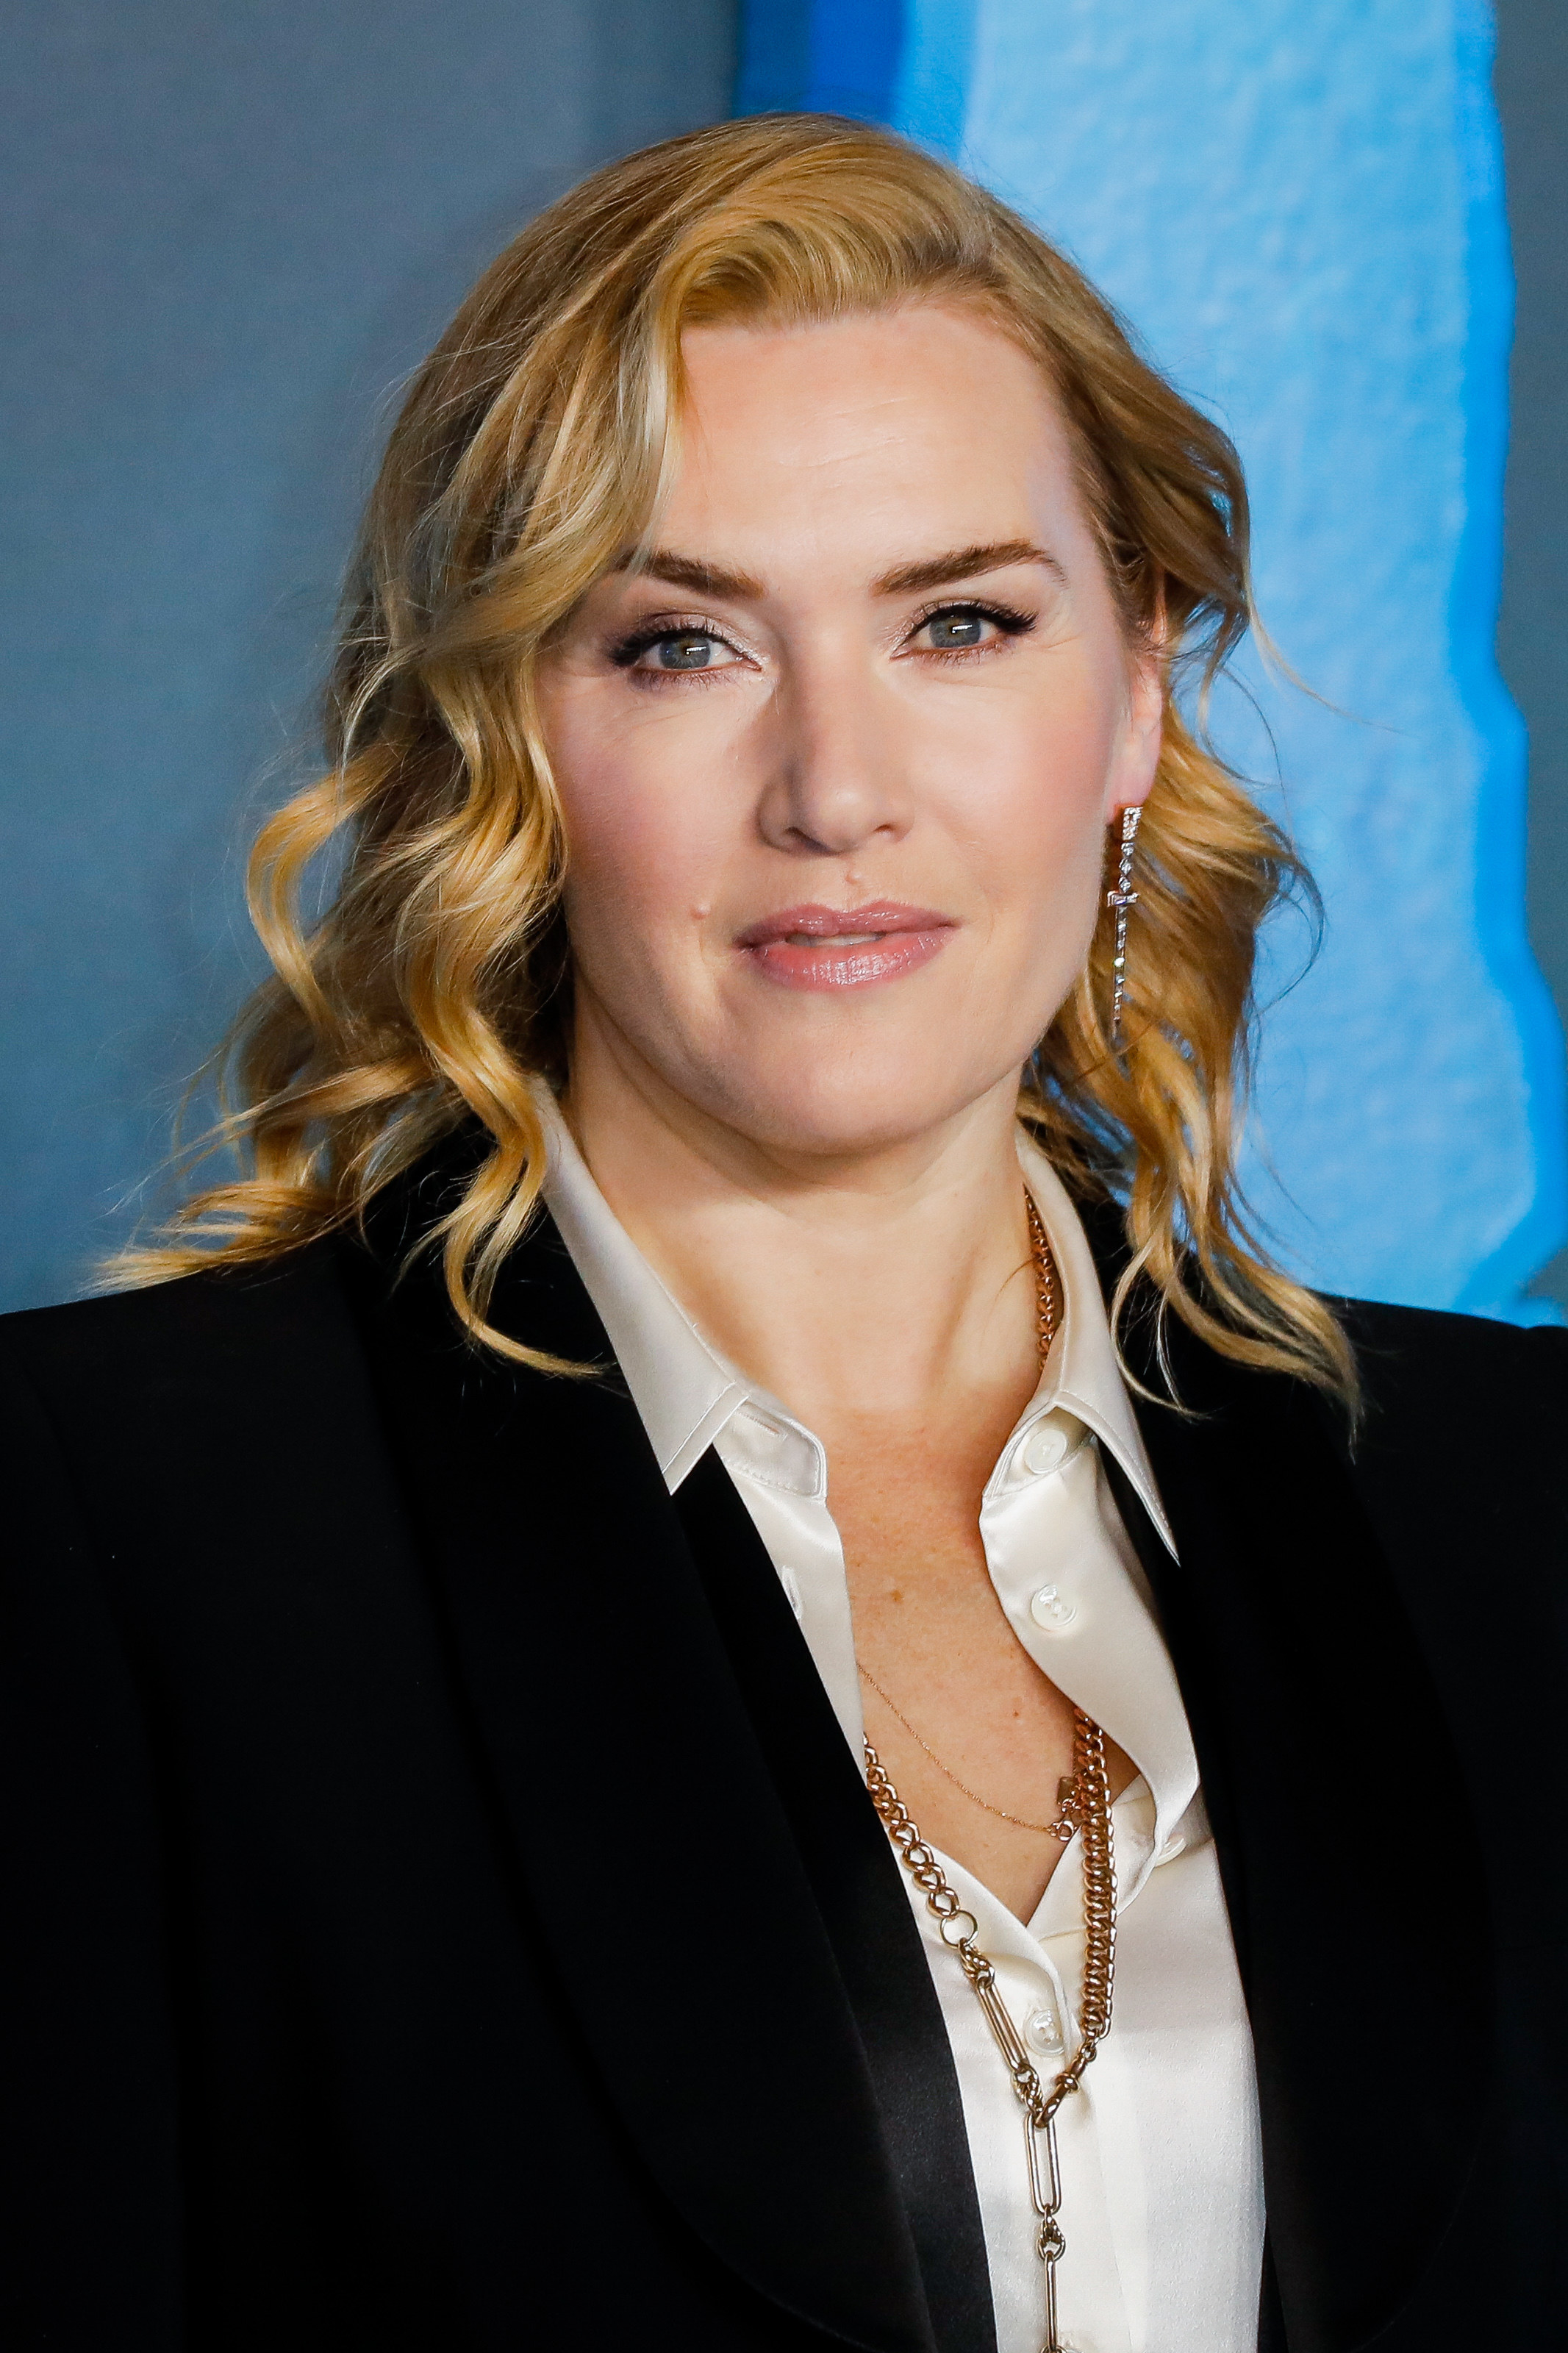 Kate Winslet's Agent Used To Asked About Her Weight